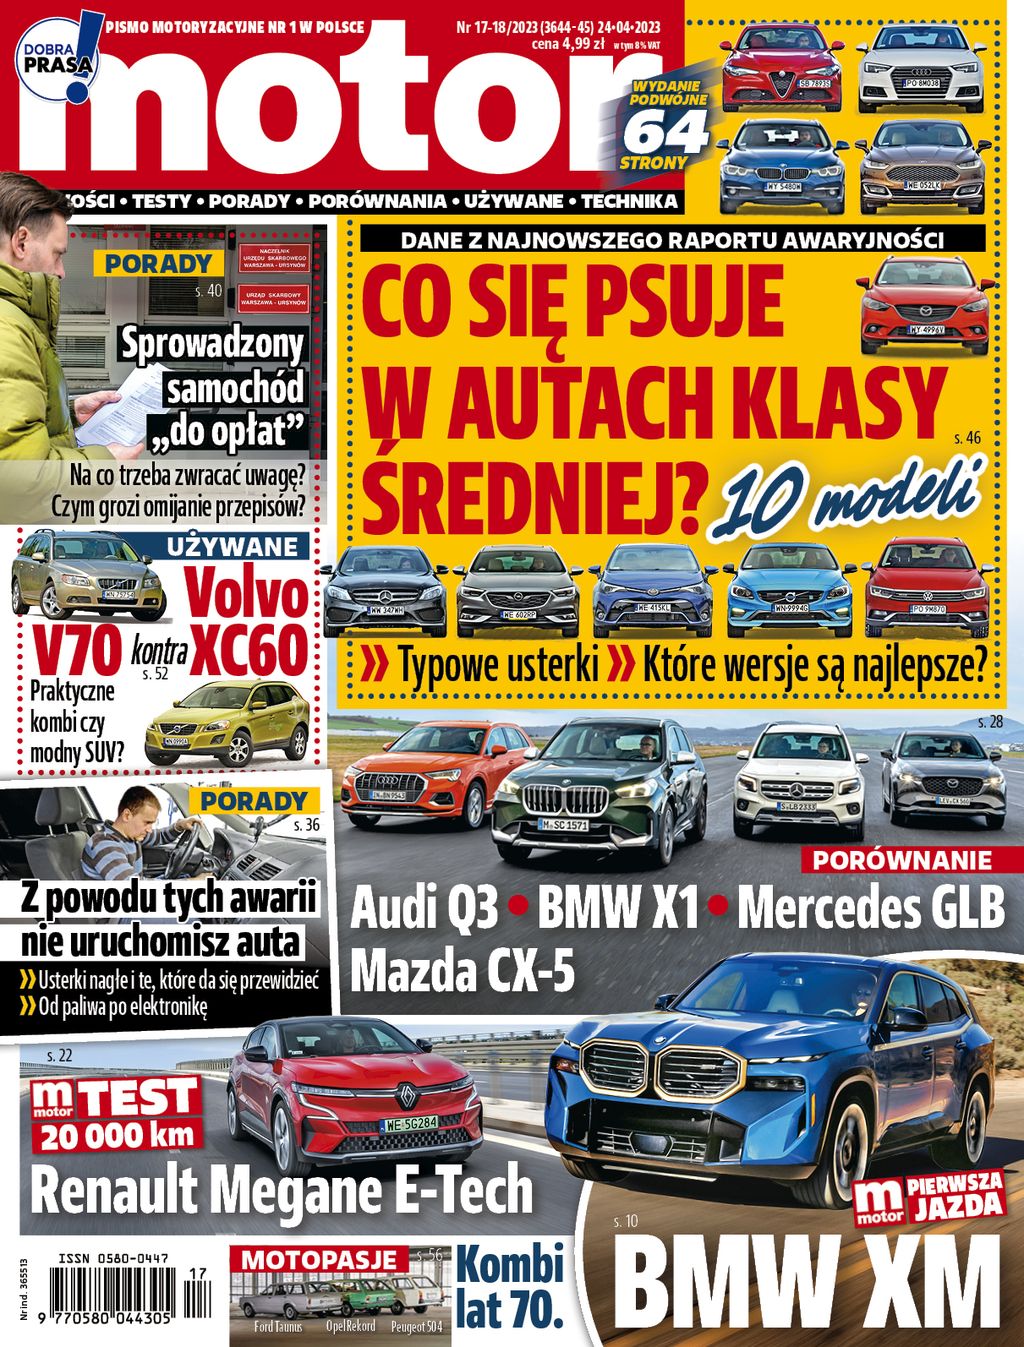 New DS 4 beats Audi A3! Privileged Press Review: MOTOR No. 17-18/2023|French.pl